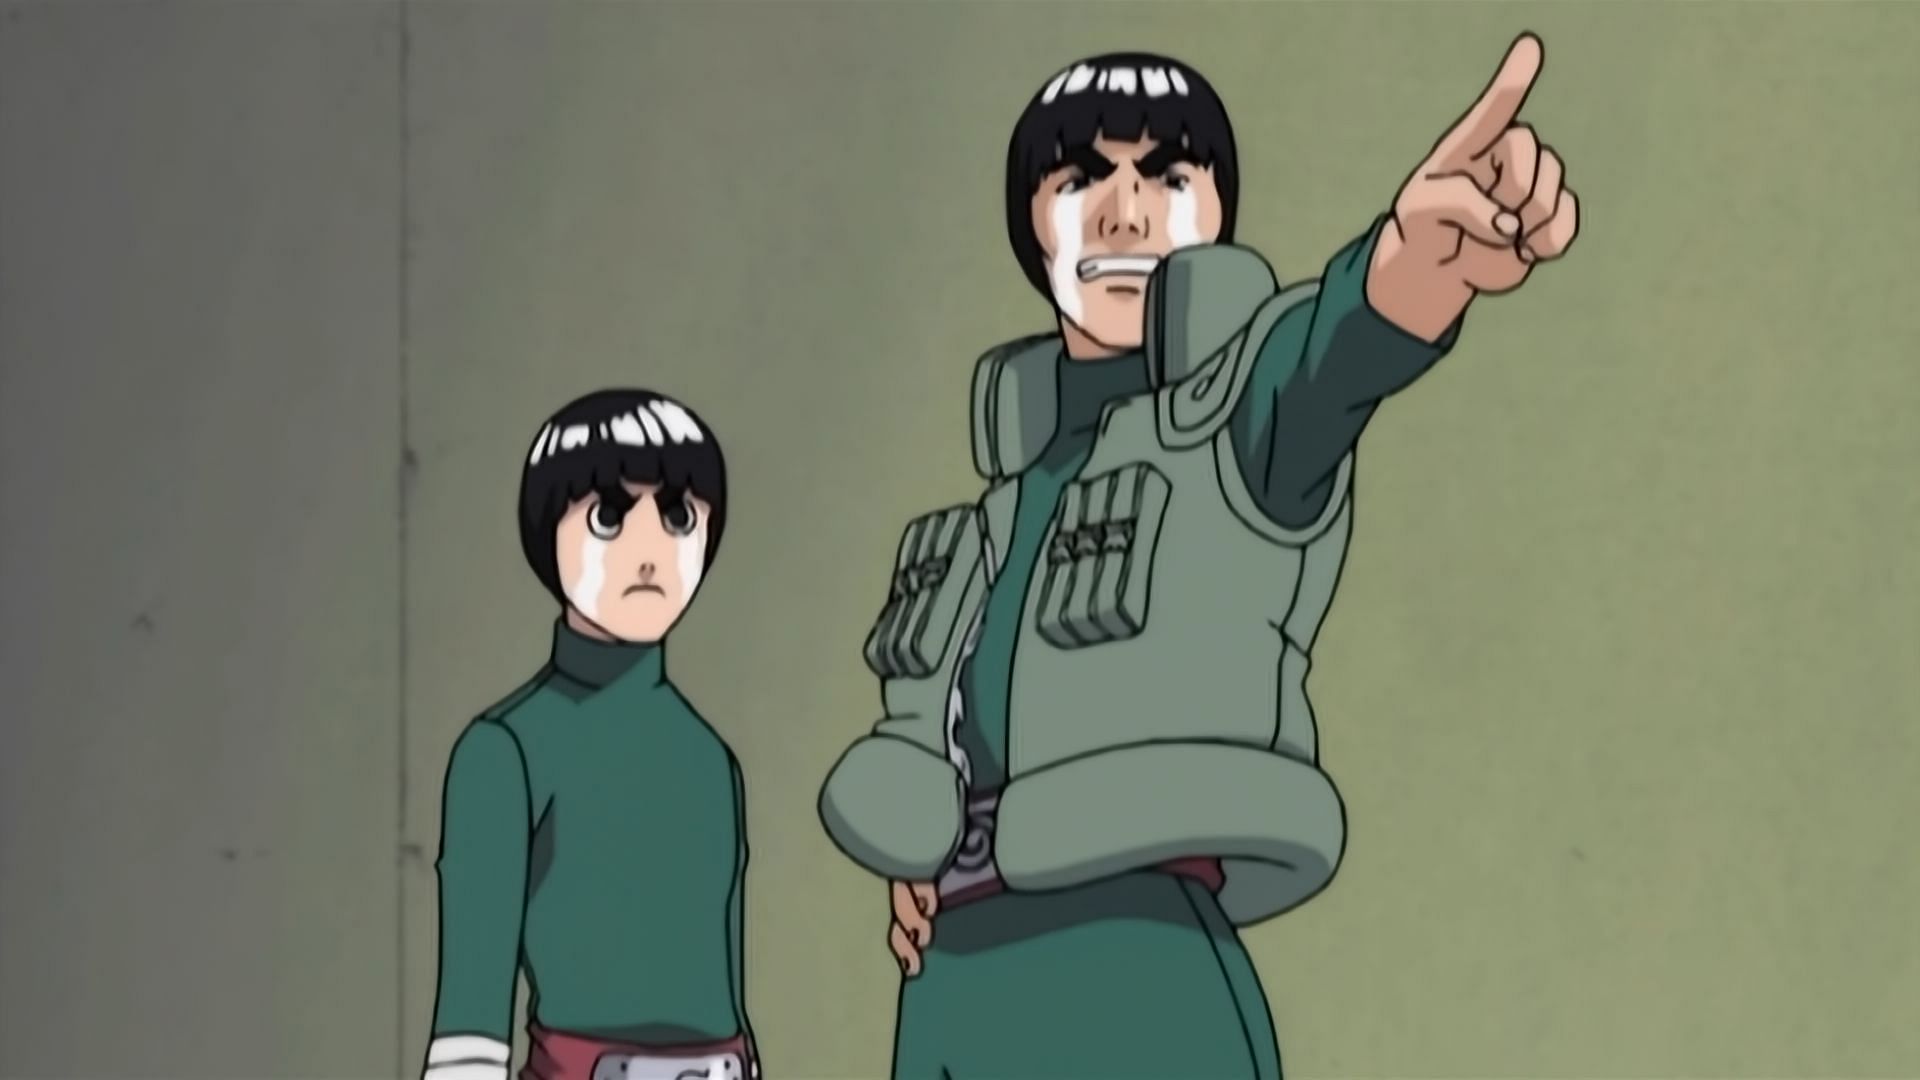 Rock Lee (left) and Might Guy (right) as seen in the Naruto anime series (Image via Studio Pierrot)